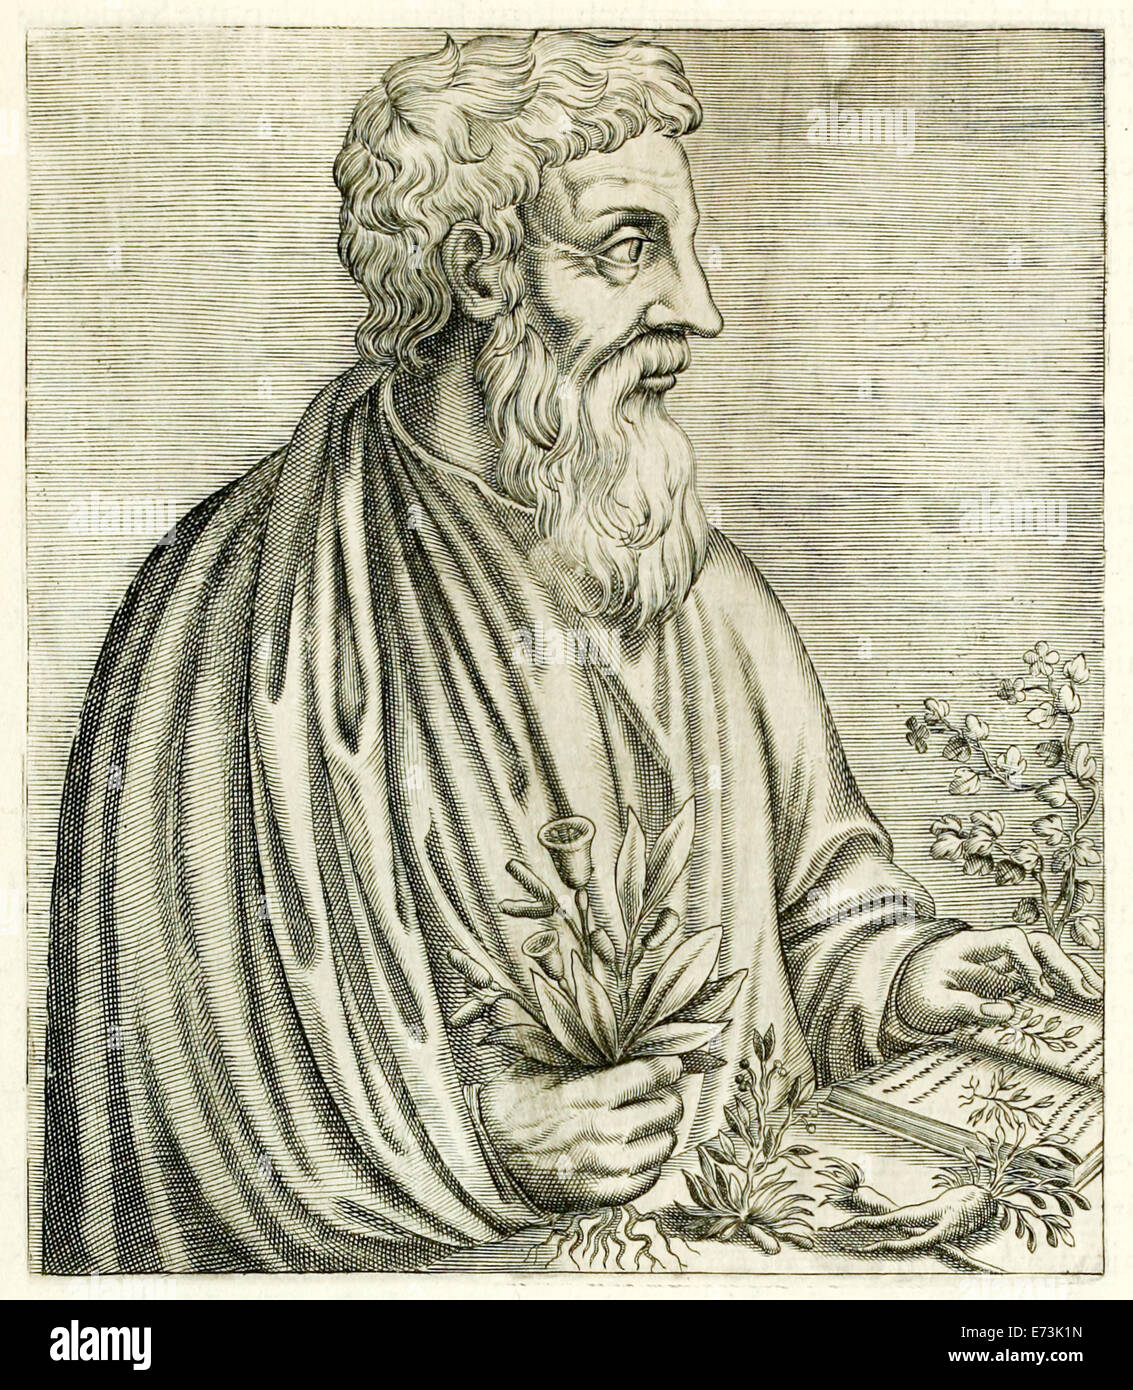 Pedanius Dioscorides (40-90AD) from “True Portraits…” by André Thévet published in 1594. See description for more information. Stock Photo